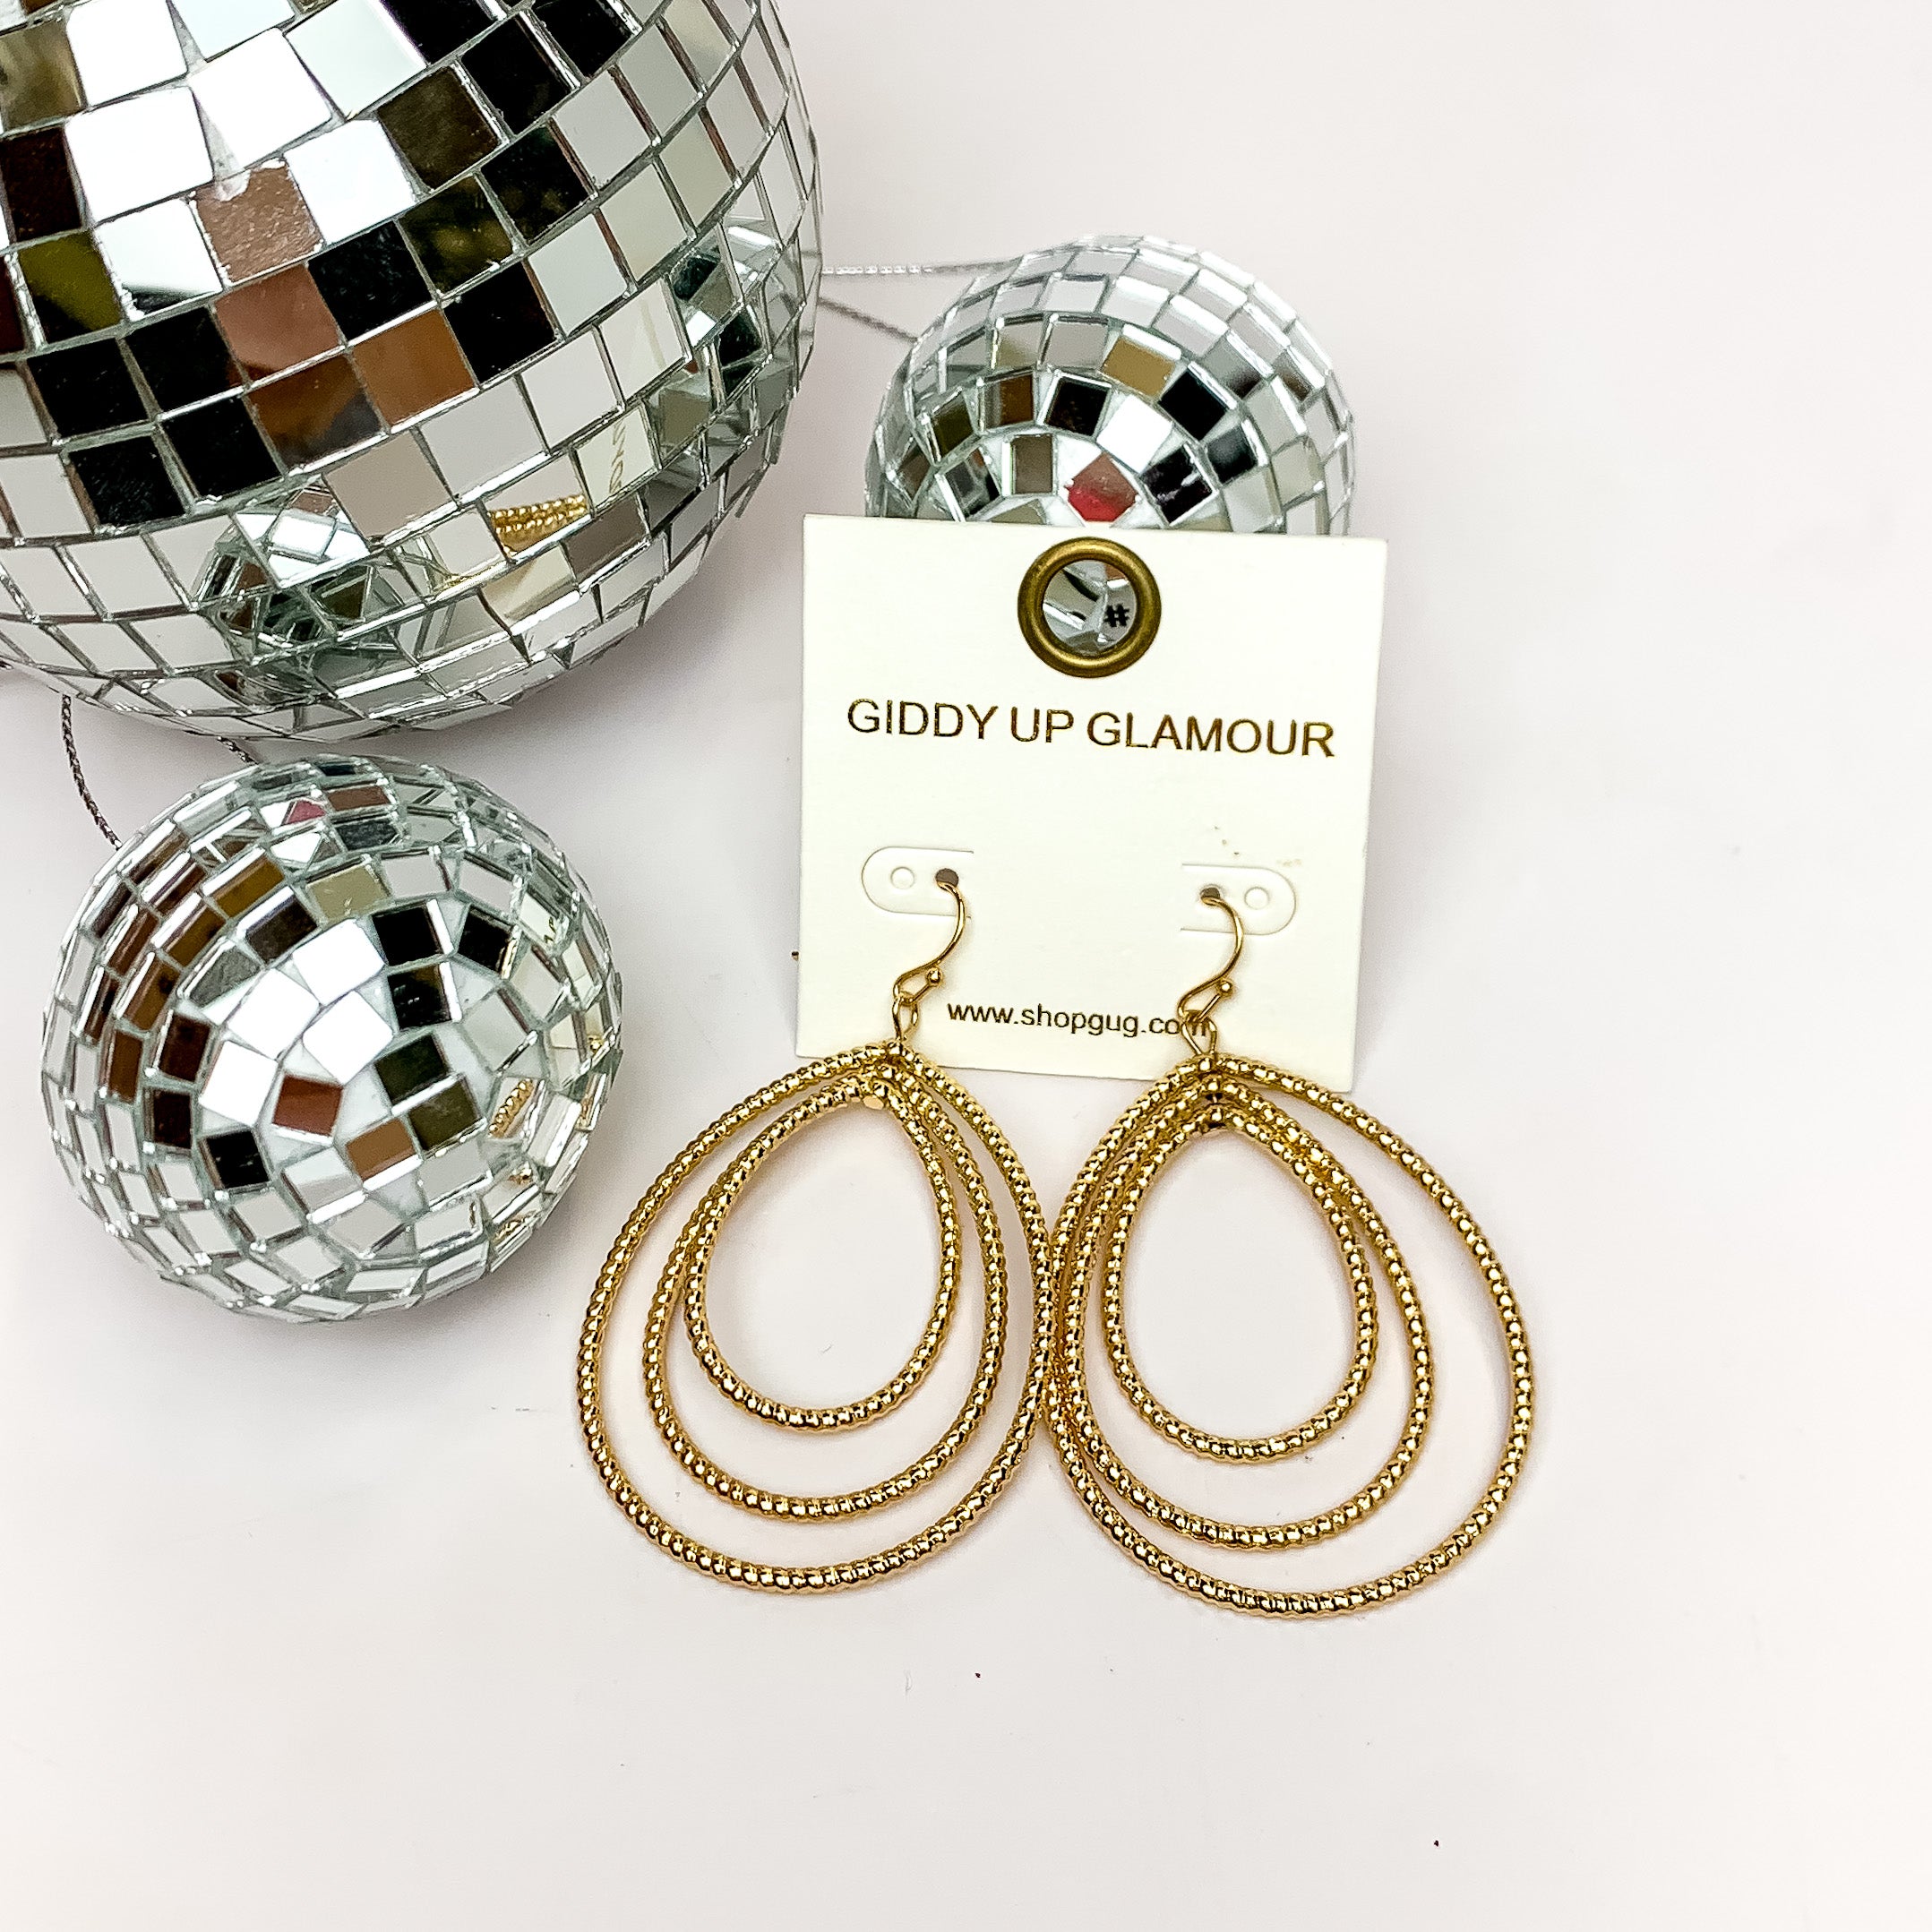 Really Radiant Triple Open Teardrop Earrings in Gold Tone. Pictured on a white background with disco balls in the top left corner.